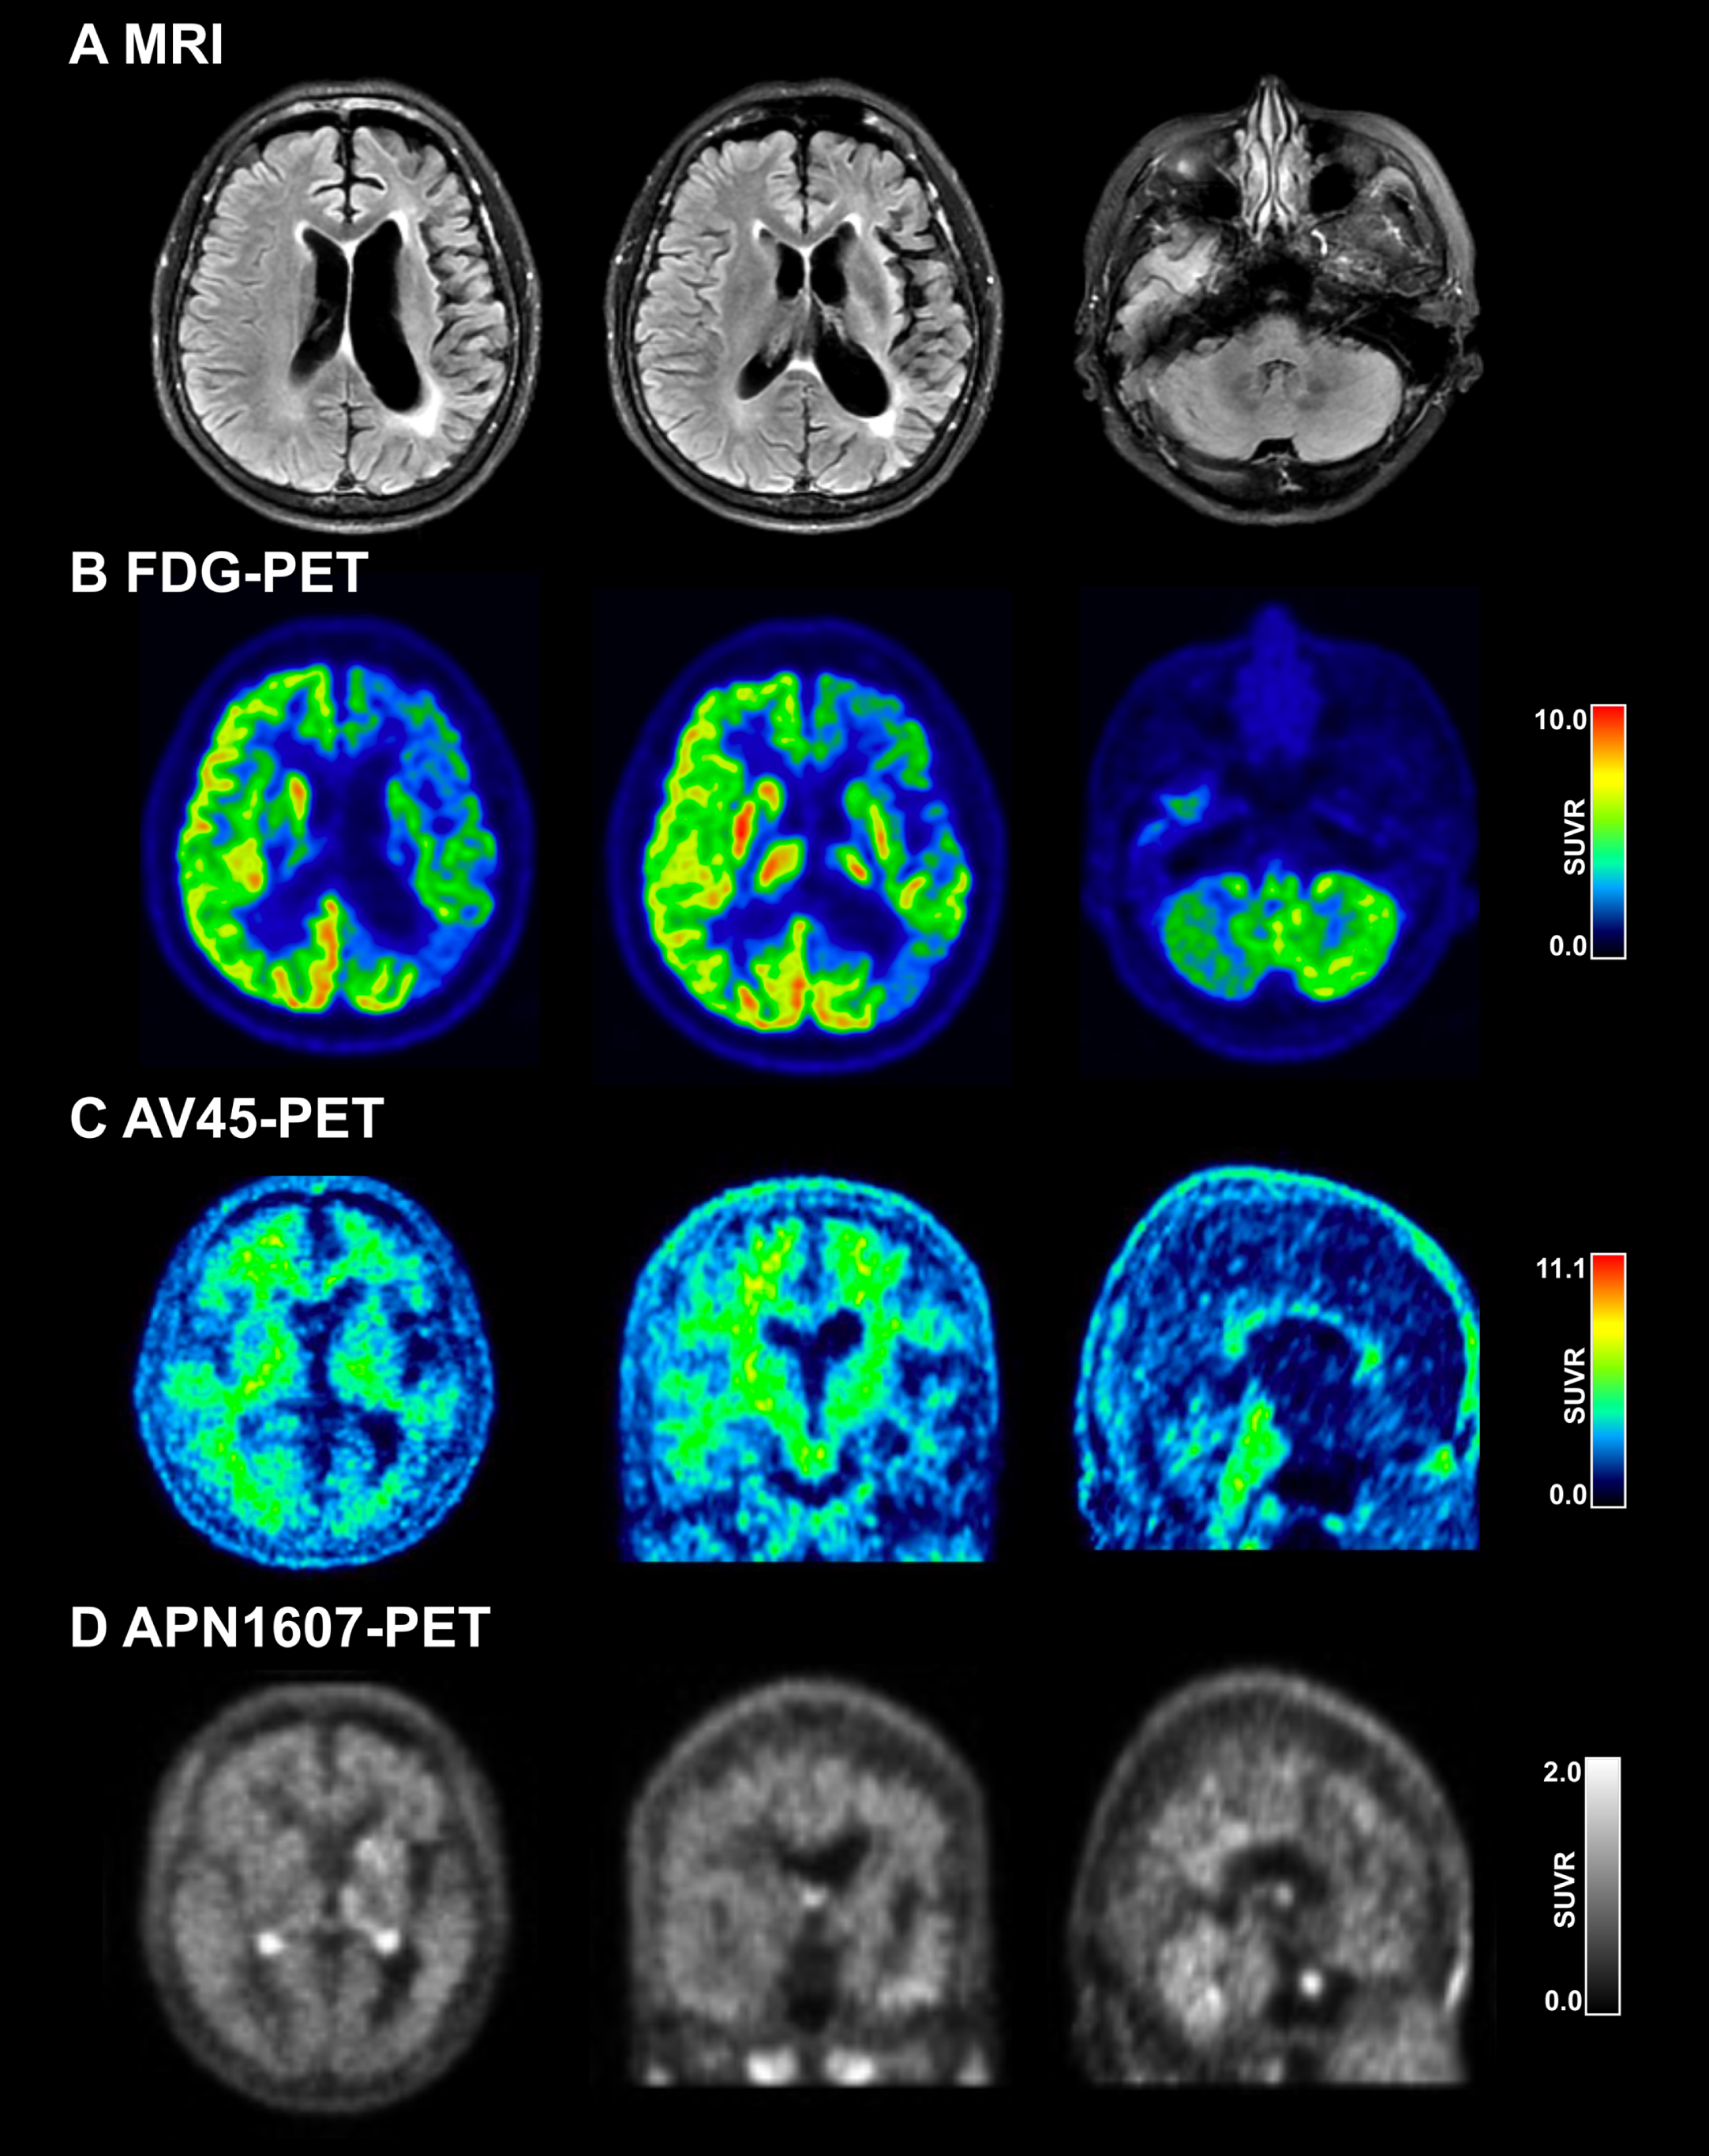 Neuroimaging of the patient with GRN mutation. A) MRI showing left-side atrophy in the frontal, temporal, and parietal lobes. B) FDG-PET showing left-side hypometabolism in the frontal, temporal, and parietal lobes. C) AV45-PET showing absence of Aβ deposition. D) APN1607 PET showing absence of tau deposition.